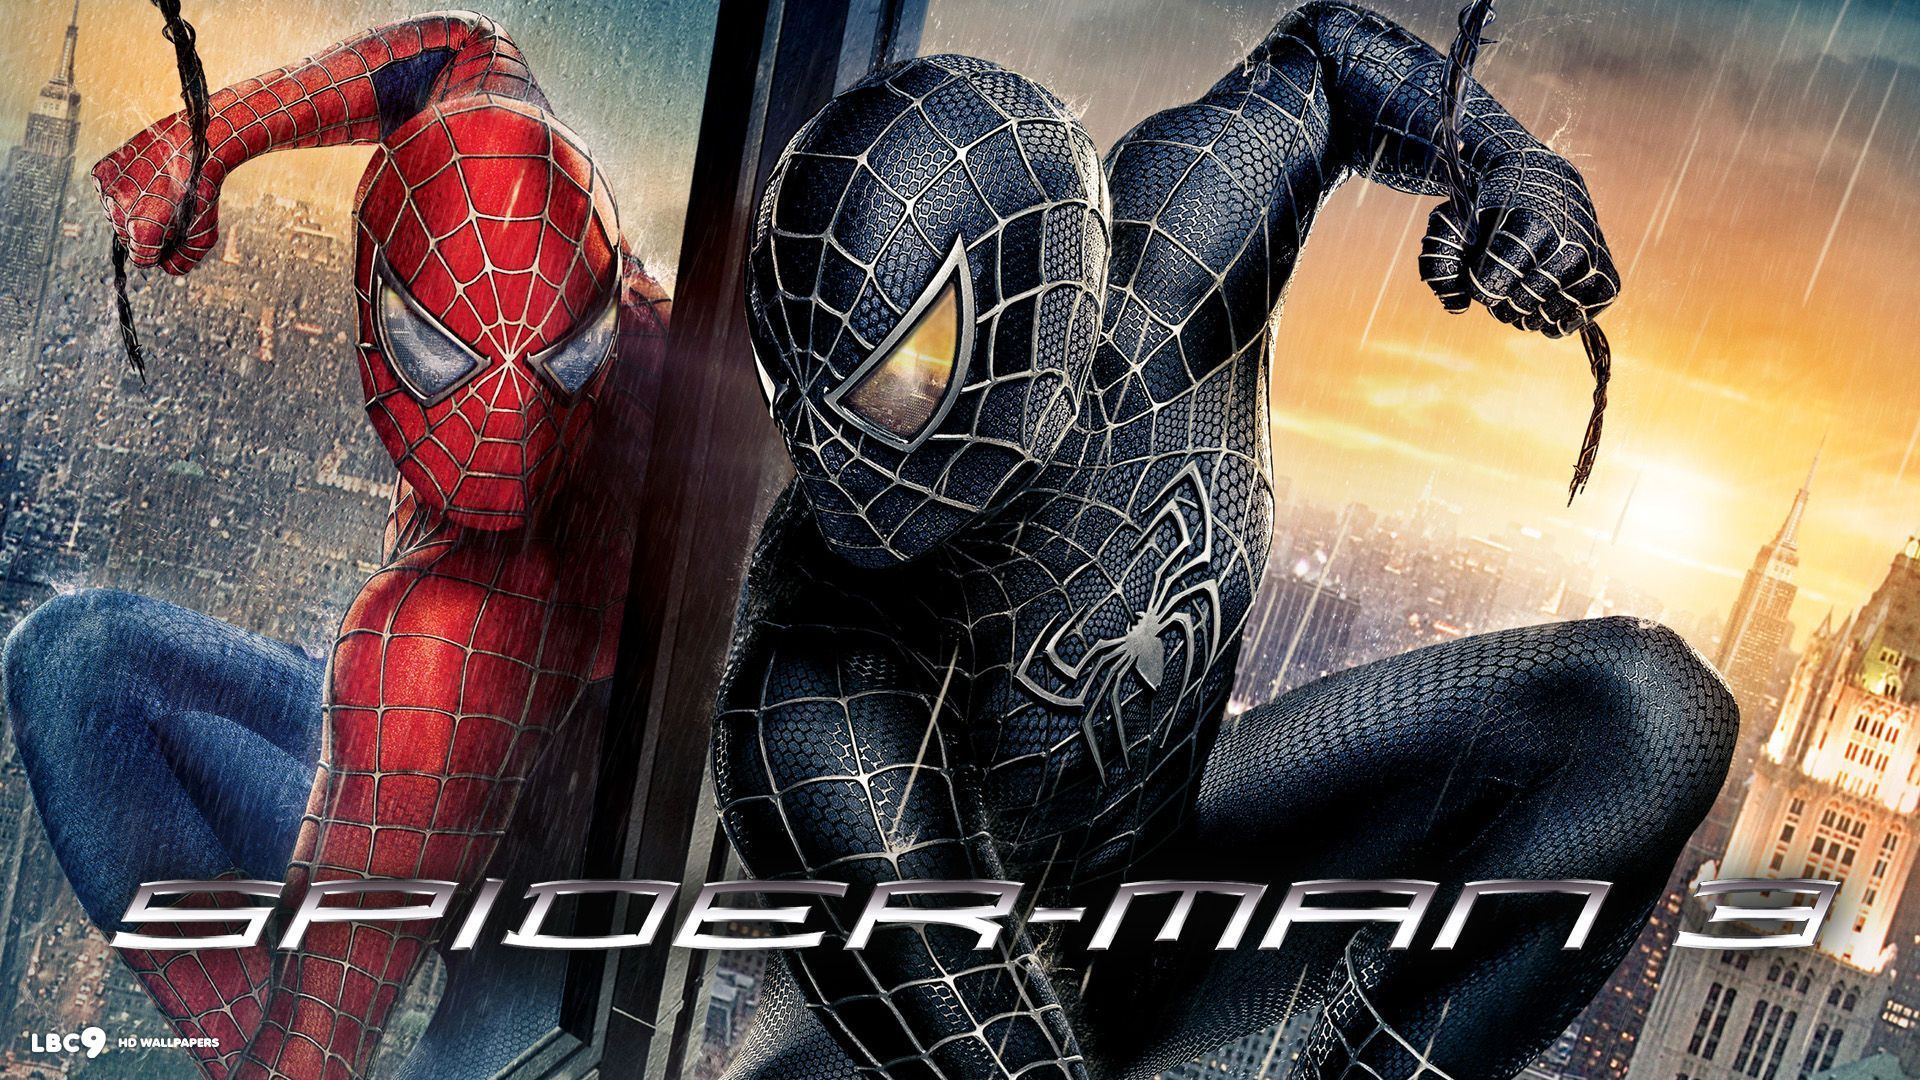 Spider man 3 wallpaper 1 / 7 movie hd backgrounds